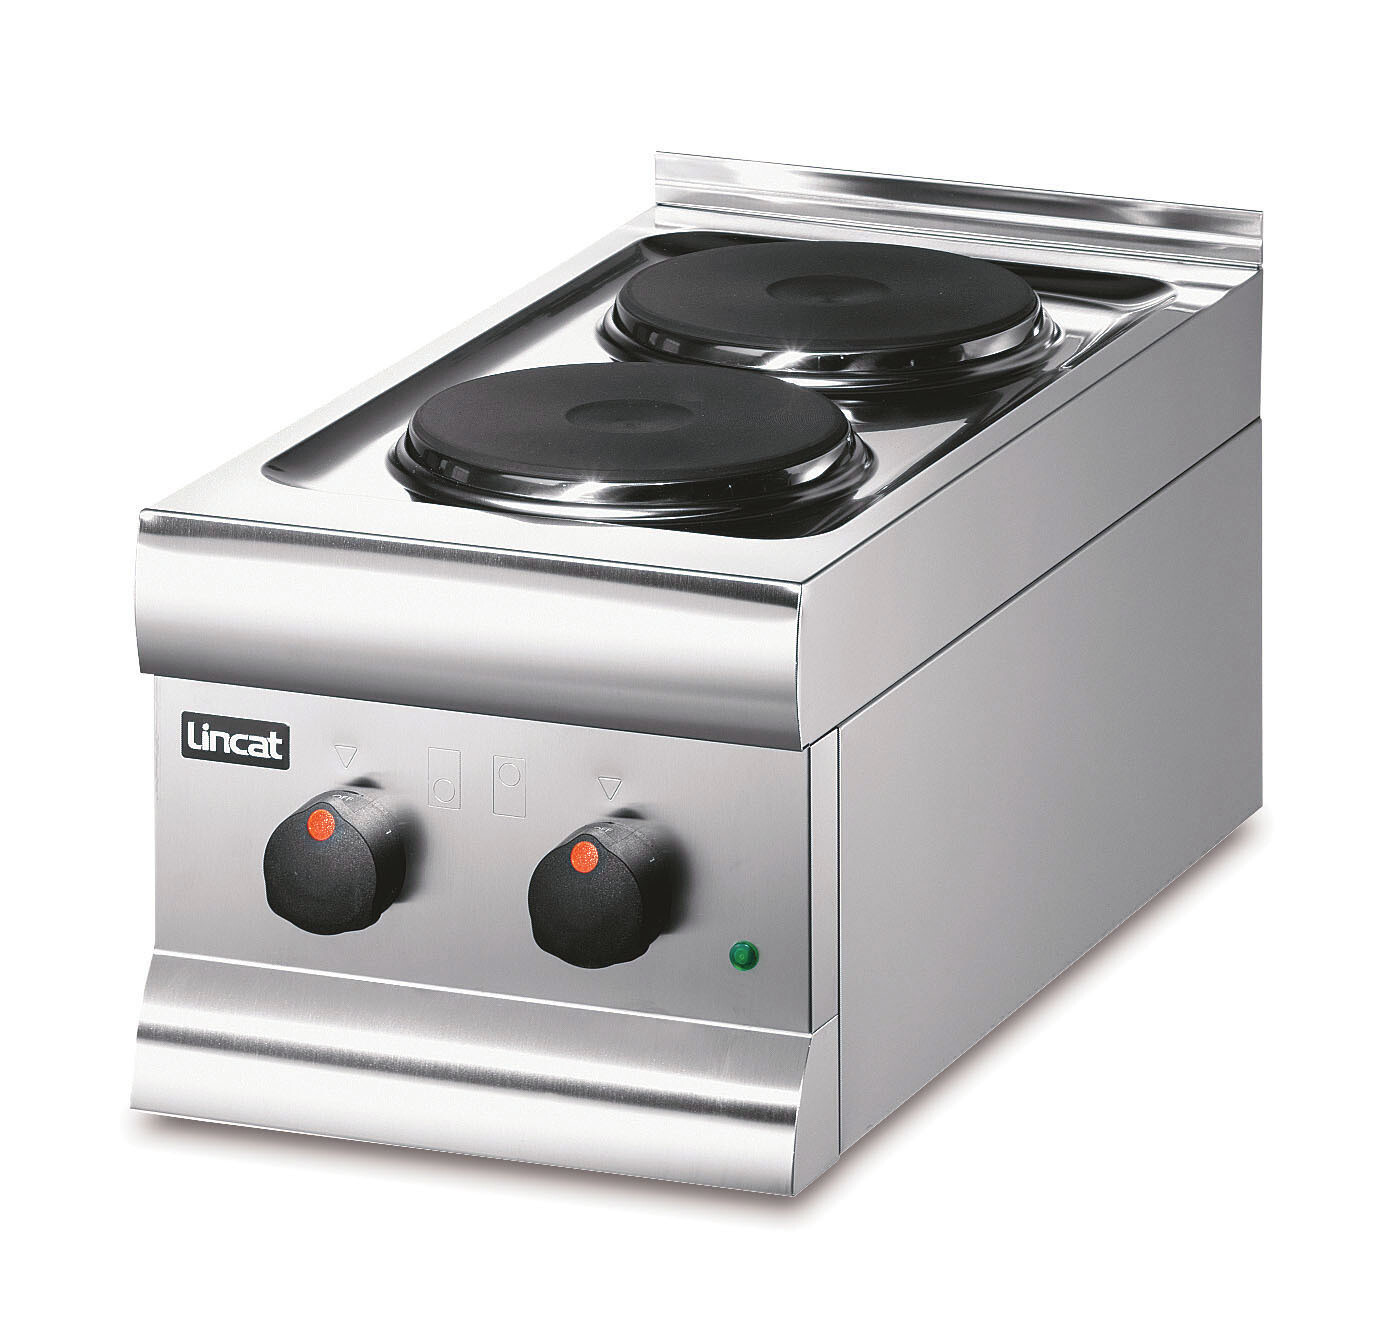 Lincat HT3 - Silverlink Electric Counter-top Boiling Top – 2 Plates – W 300 mm – 3.0 kW